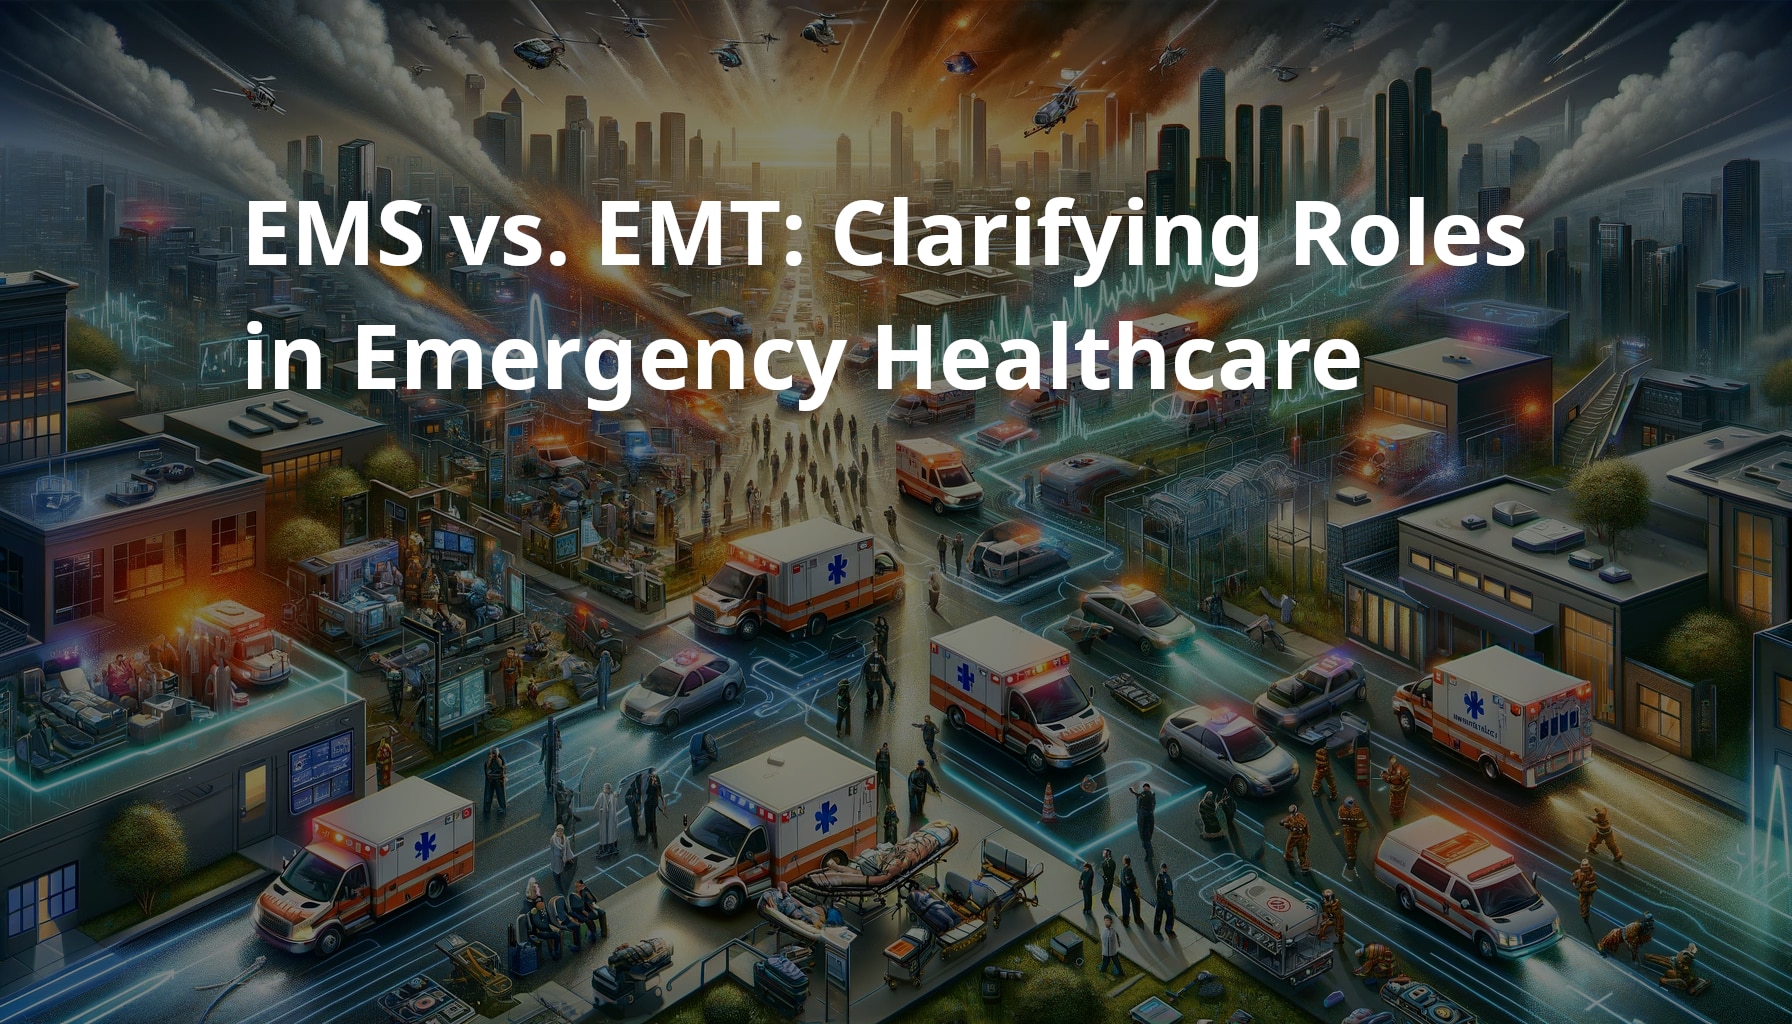 Dynamic emergency healthcare scene with ambulances, EMTs in action, and a command center, illustrating the roles of EMS and EMT in emergency medical services.